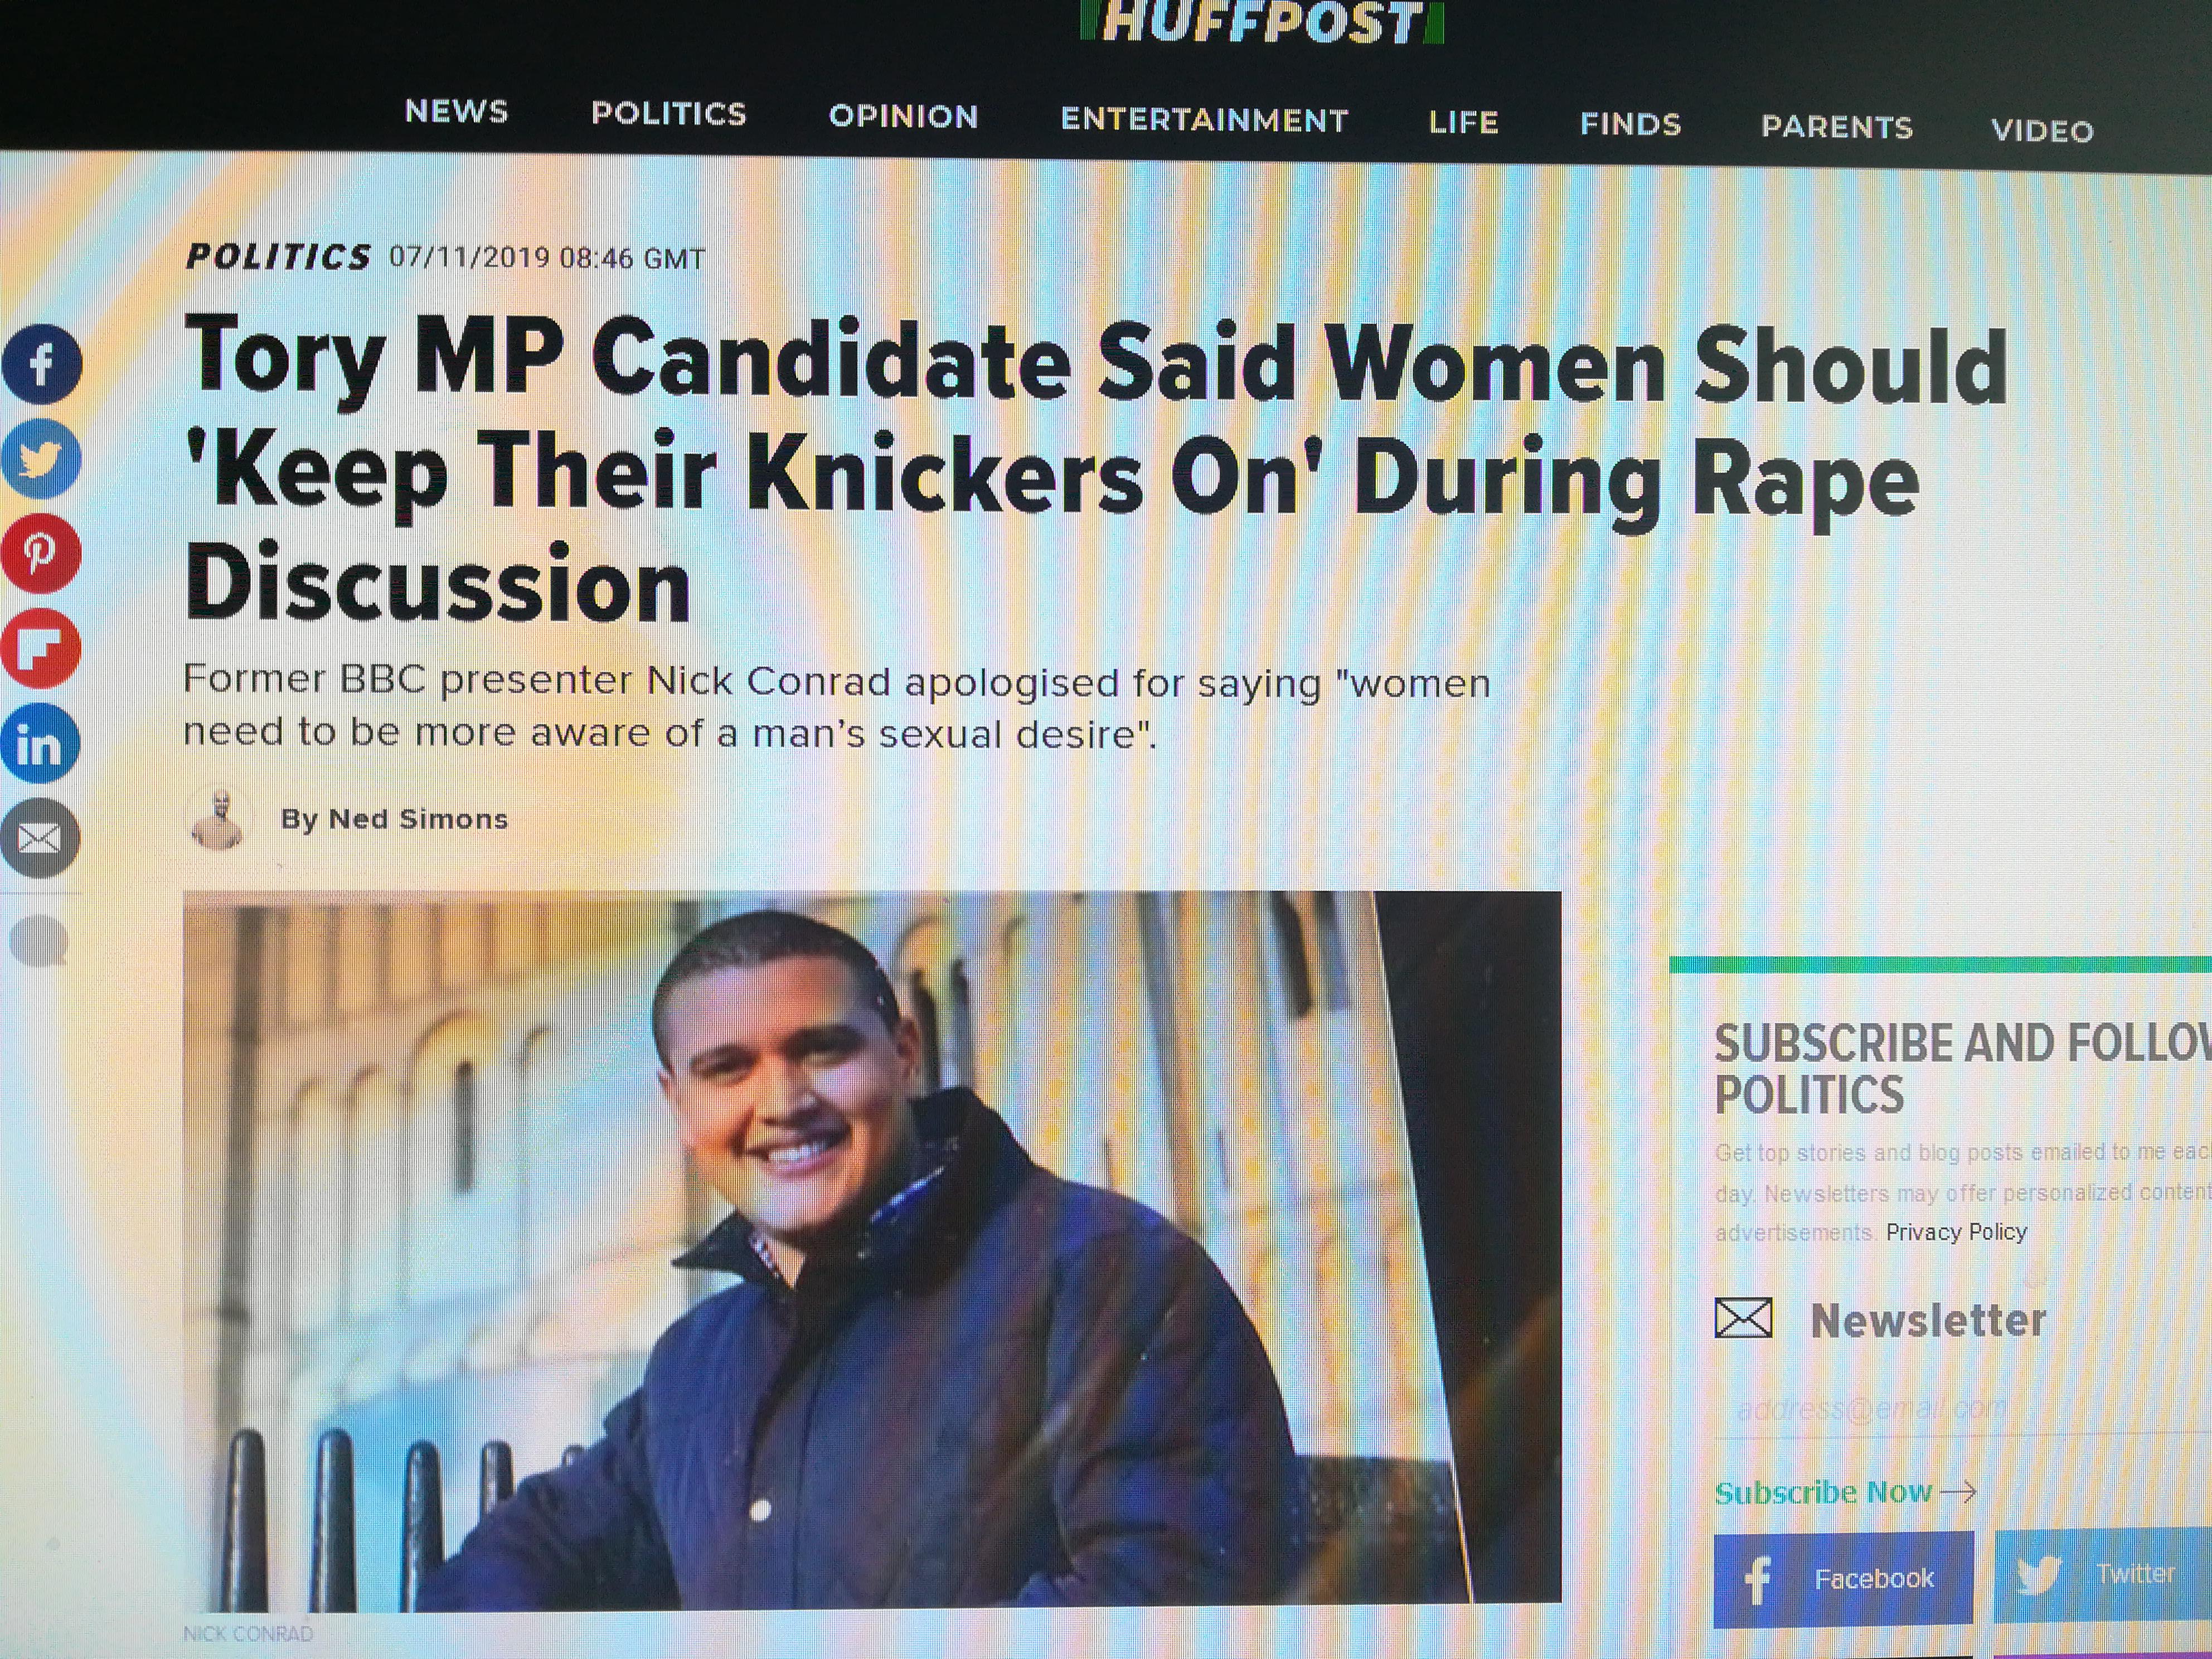 website - Huffpost News Politics Opinion Entertainment Life Finds Parents Video Politics 07112010 Gmt Tory Mp Candidate Said Women Should 'Keep Their Knickers On' During Rape Discussion 00000 Former Bbc presenter Nick Conrad apologised for saying